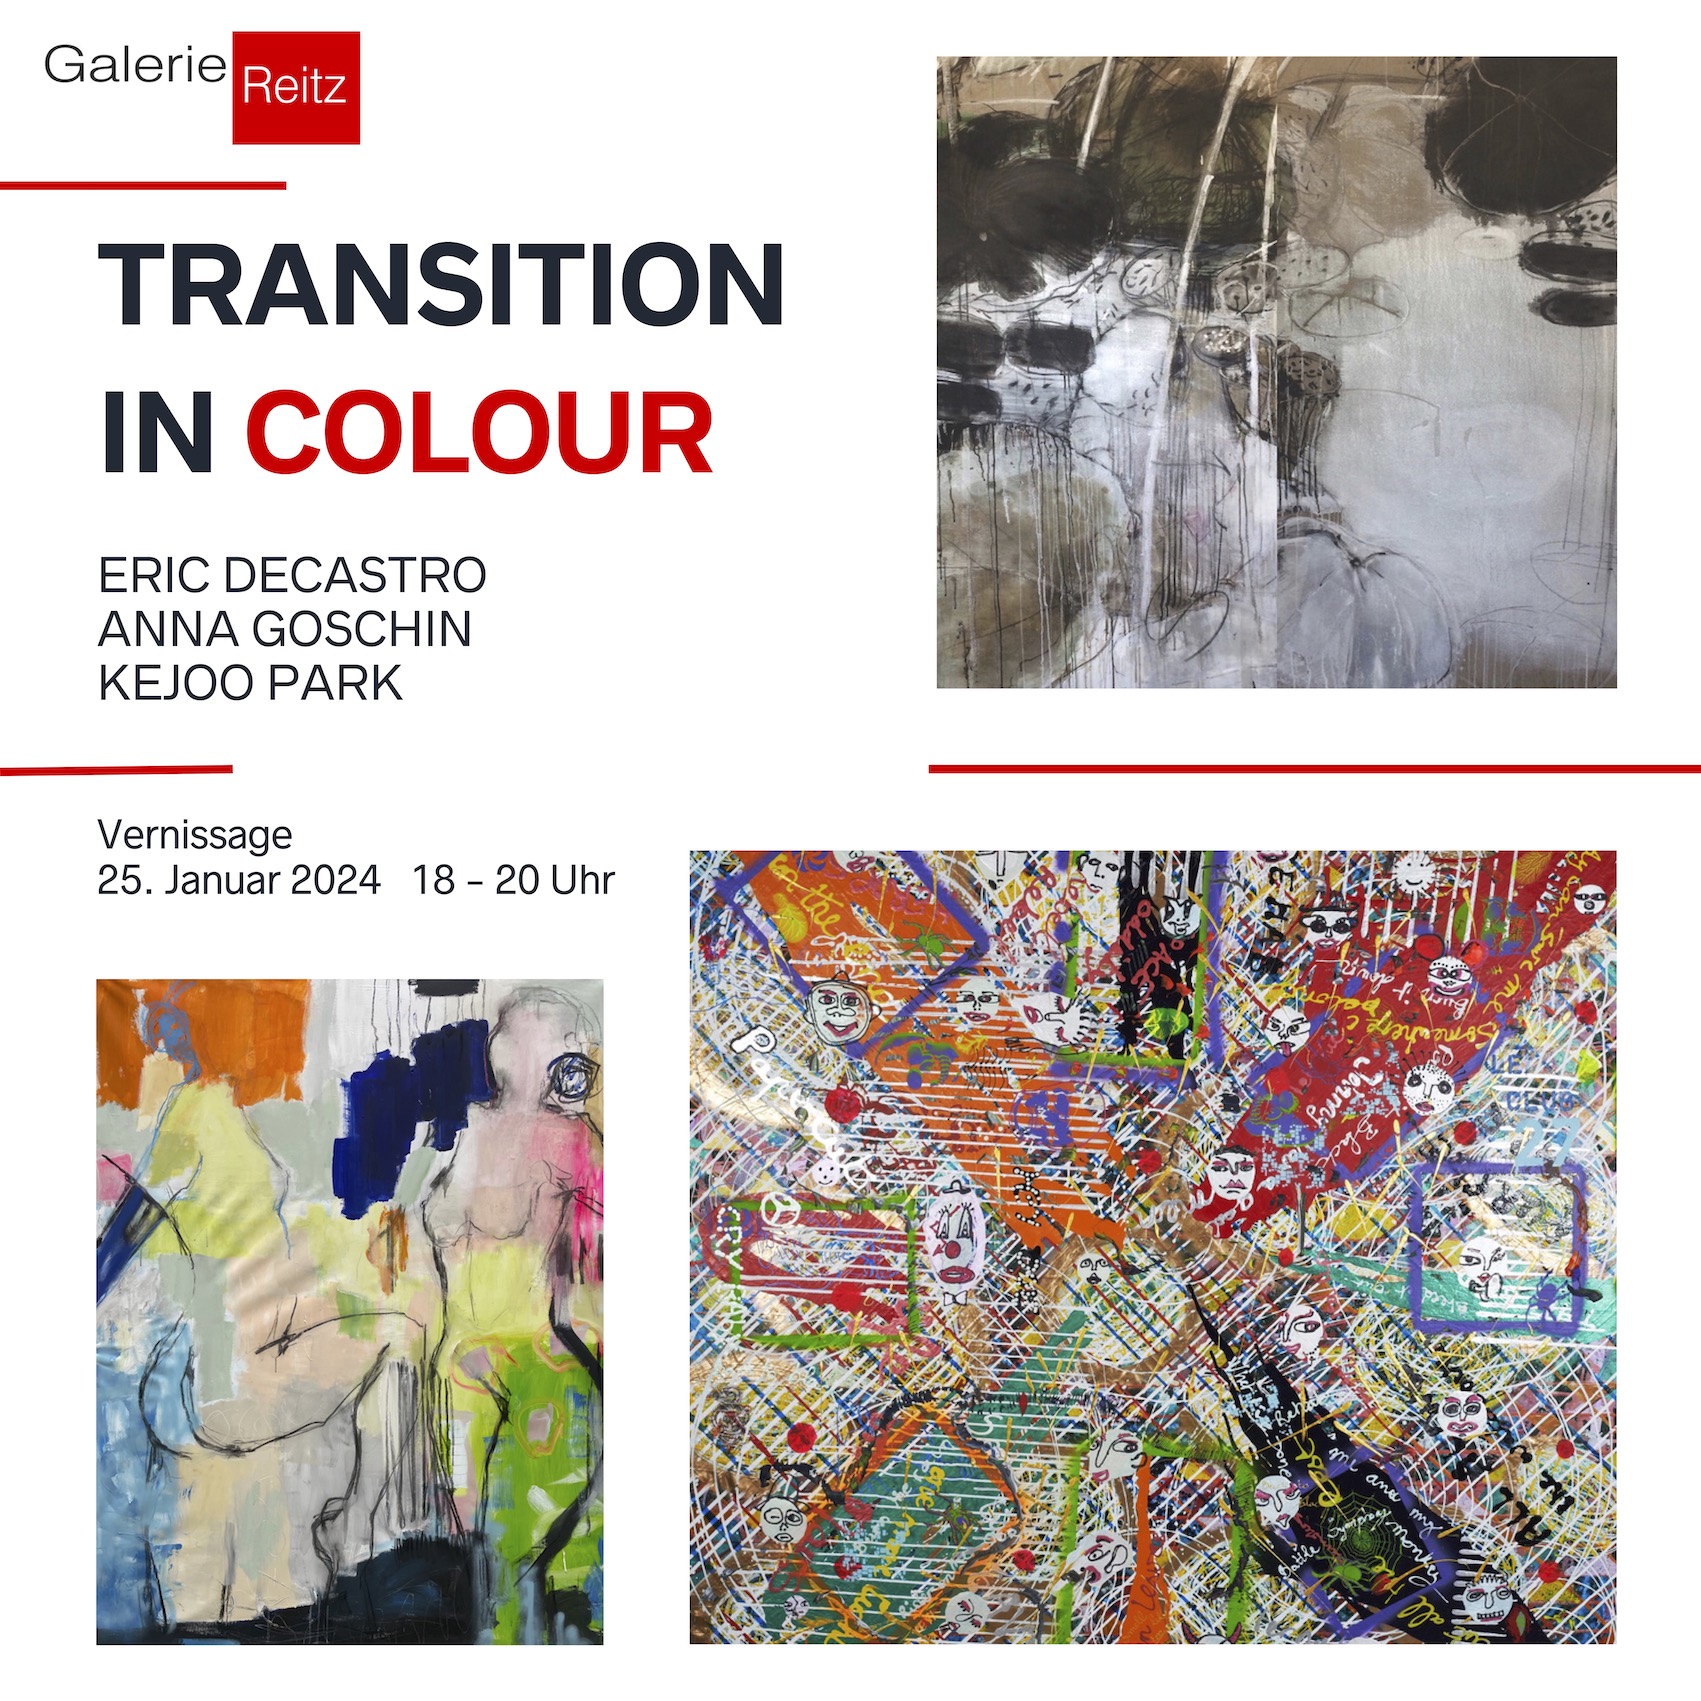 TRANSITION IN COLOUR: January 25, 2024 - February 29, 2024